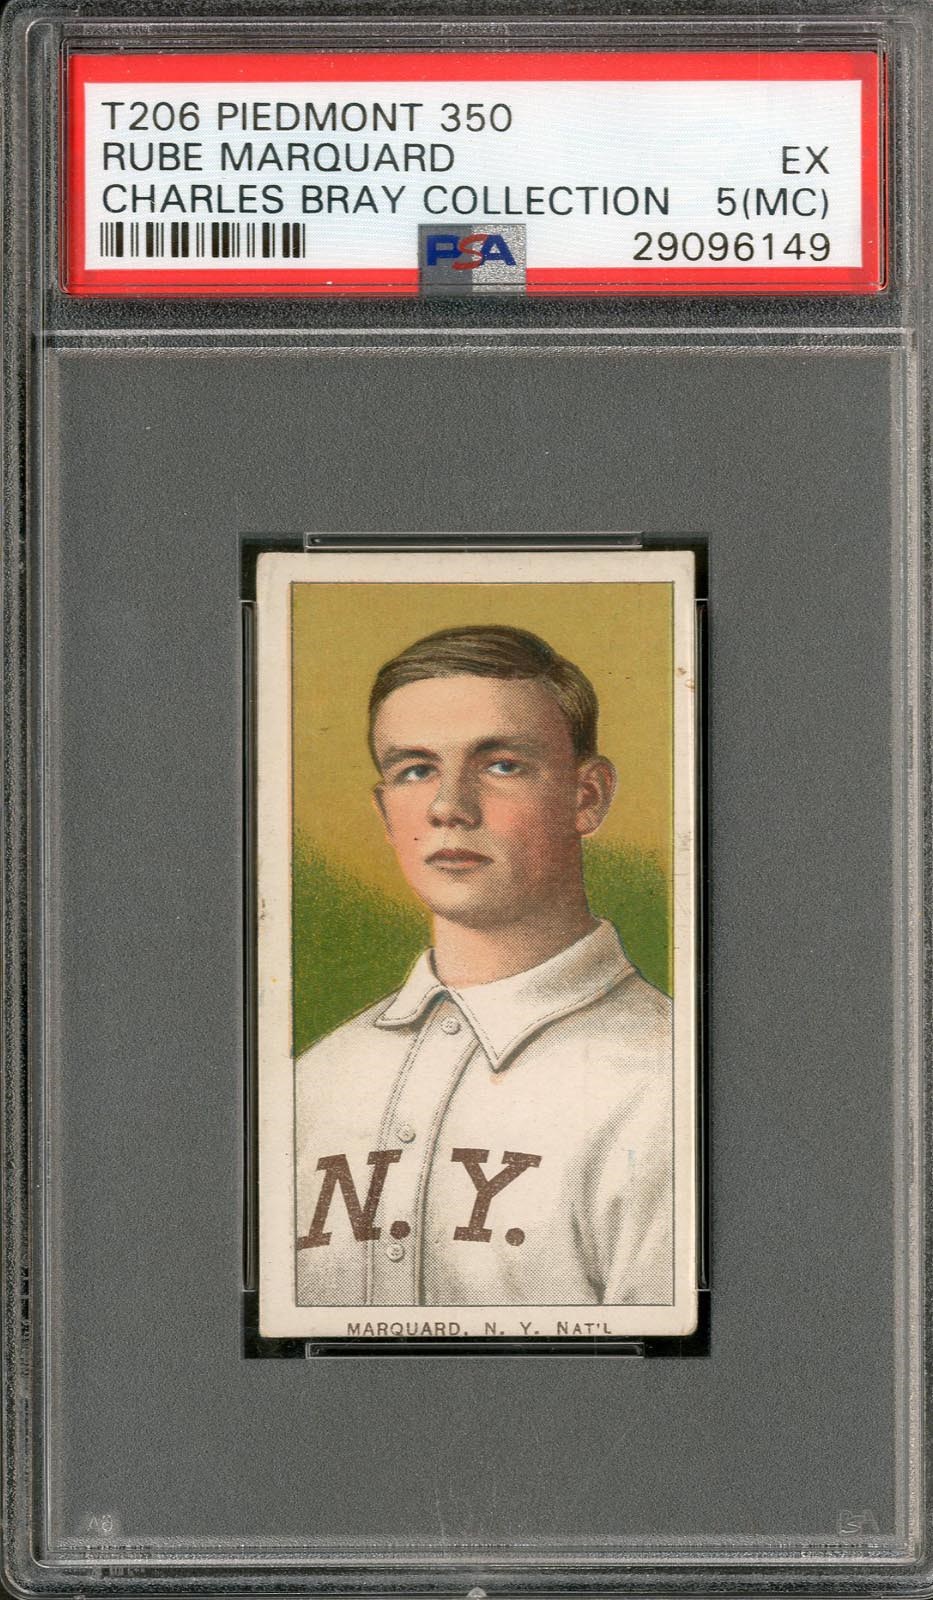 - T206 Piedmont 350 Rube Marquard PSA 5(MC) From The Charles Bray Collection